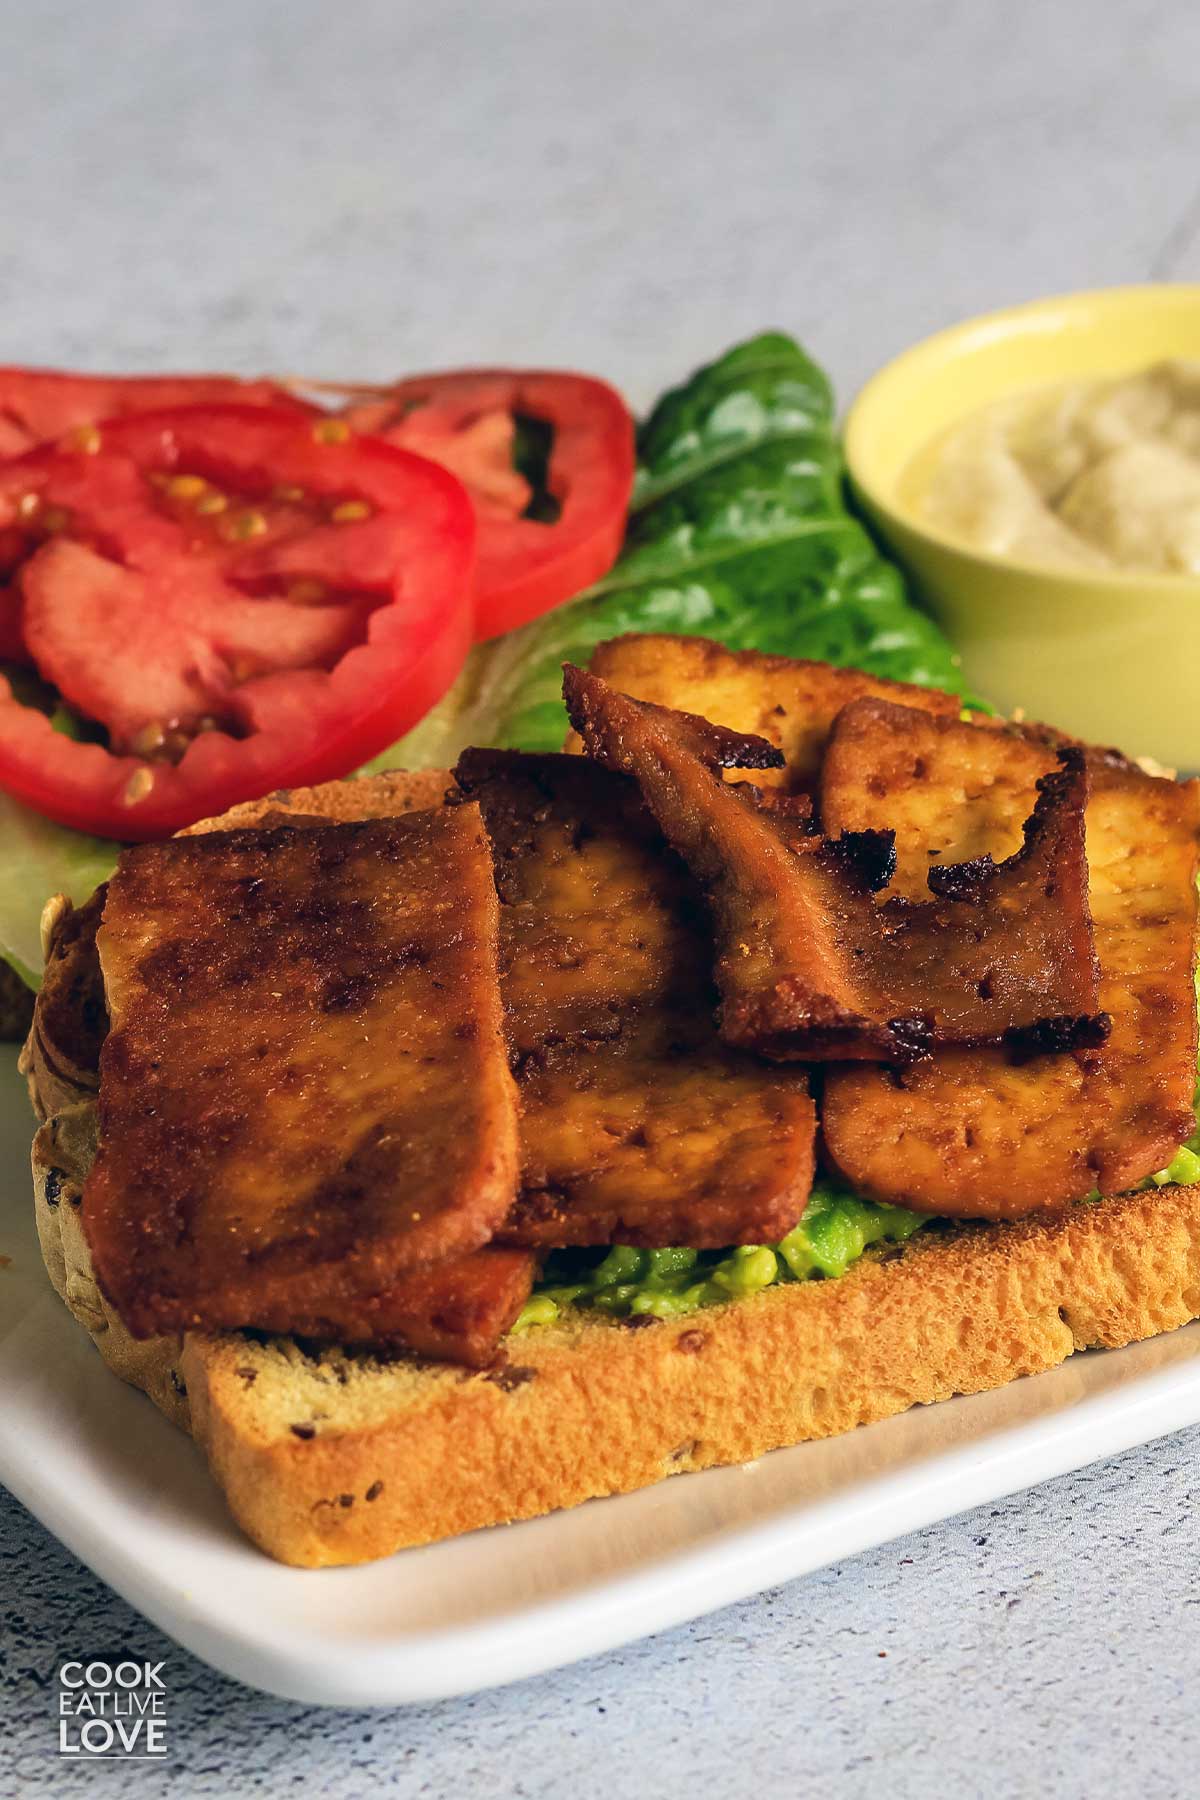 A piece of bread topped with marinated tofu with another slice of bread in the back with lettuce and tomato.